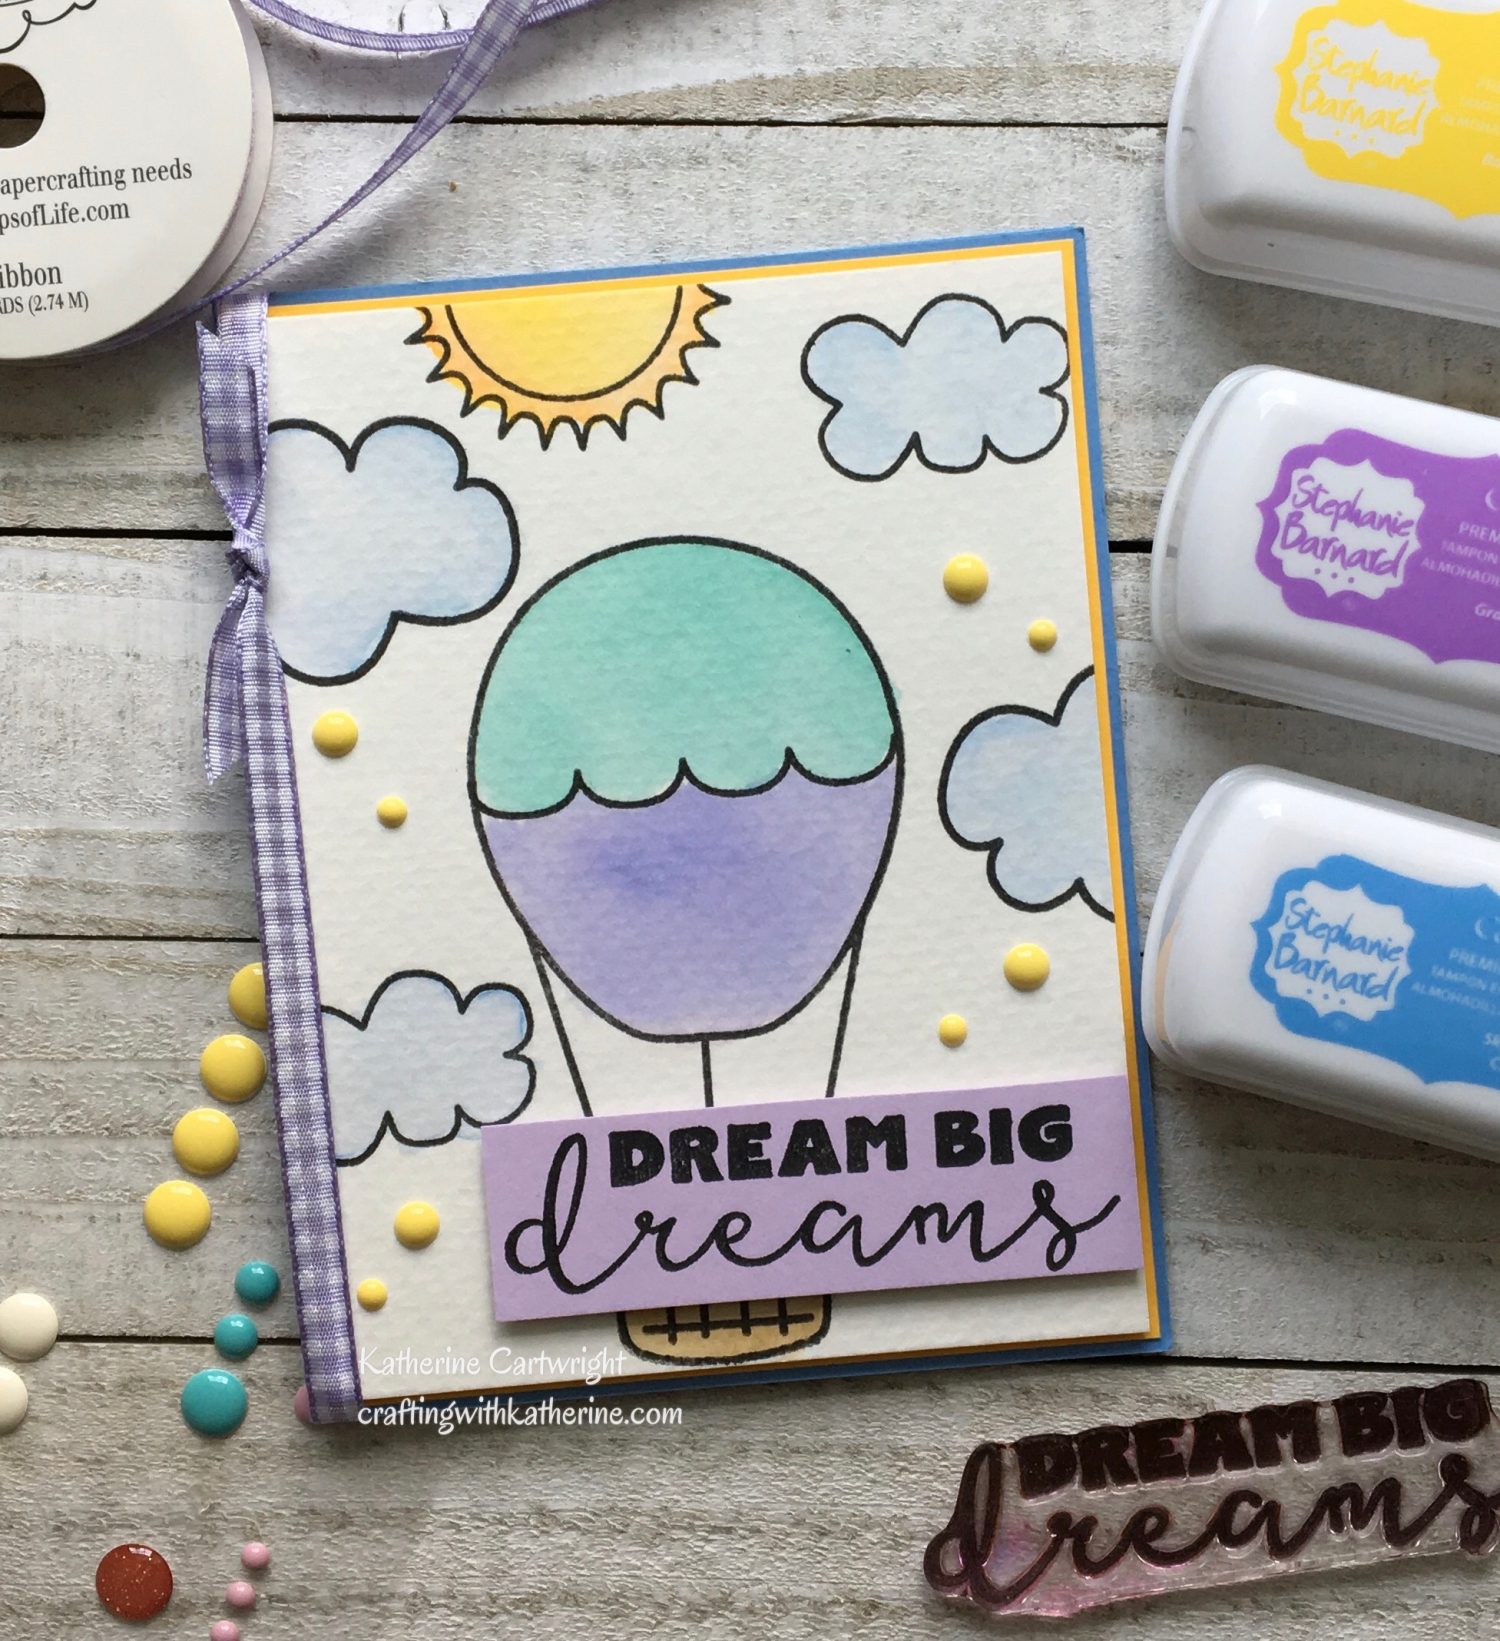 You are currently viewing Dream Big Dreams featuring The Stamps of Life